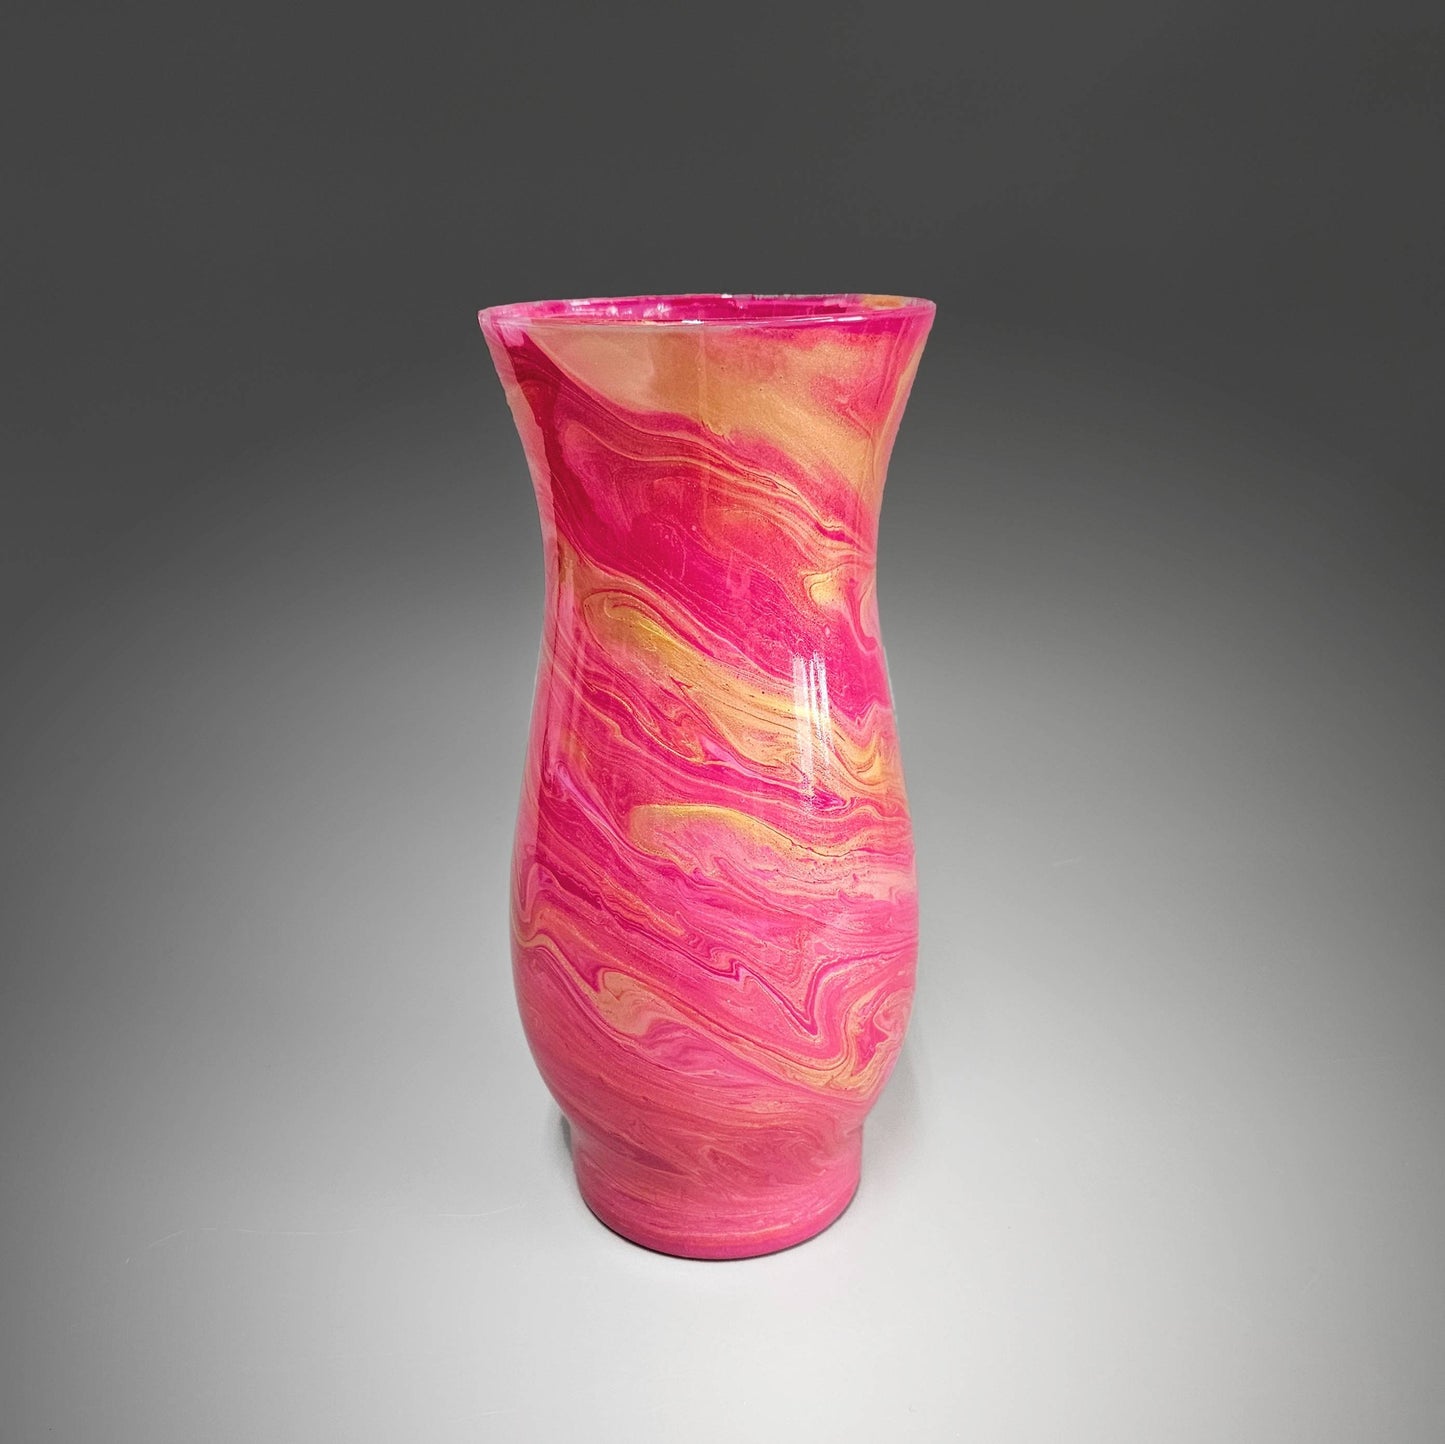 Painted Vase in Pink and Gold